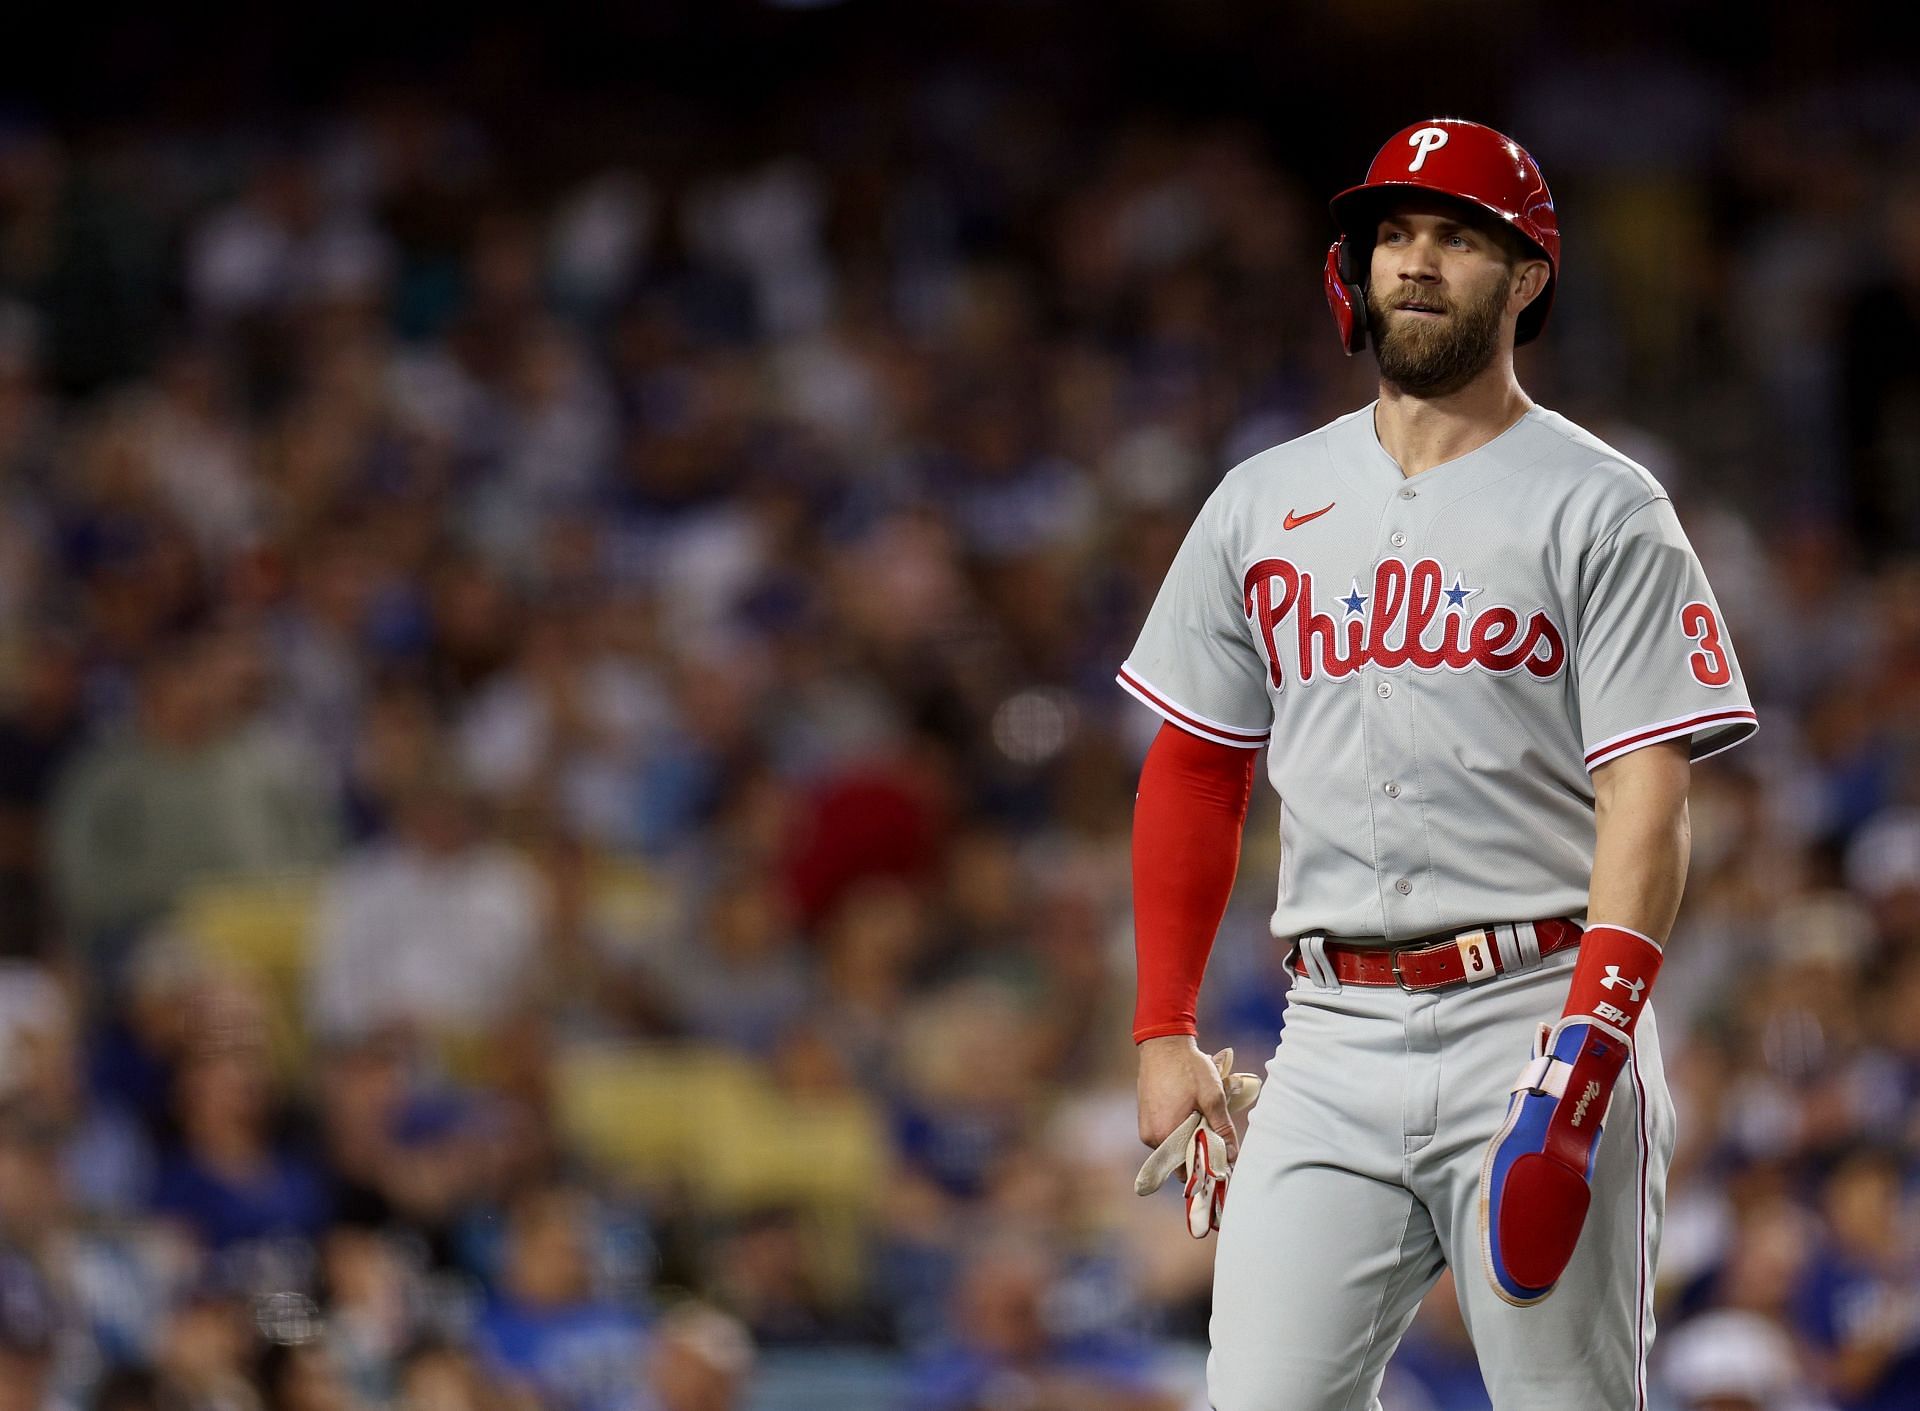 Philadelphia Phillies slugger Bryce Harper had to adjust to being a part-time designated hitter this season.